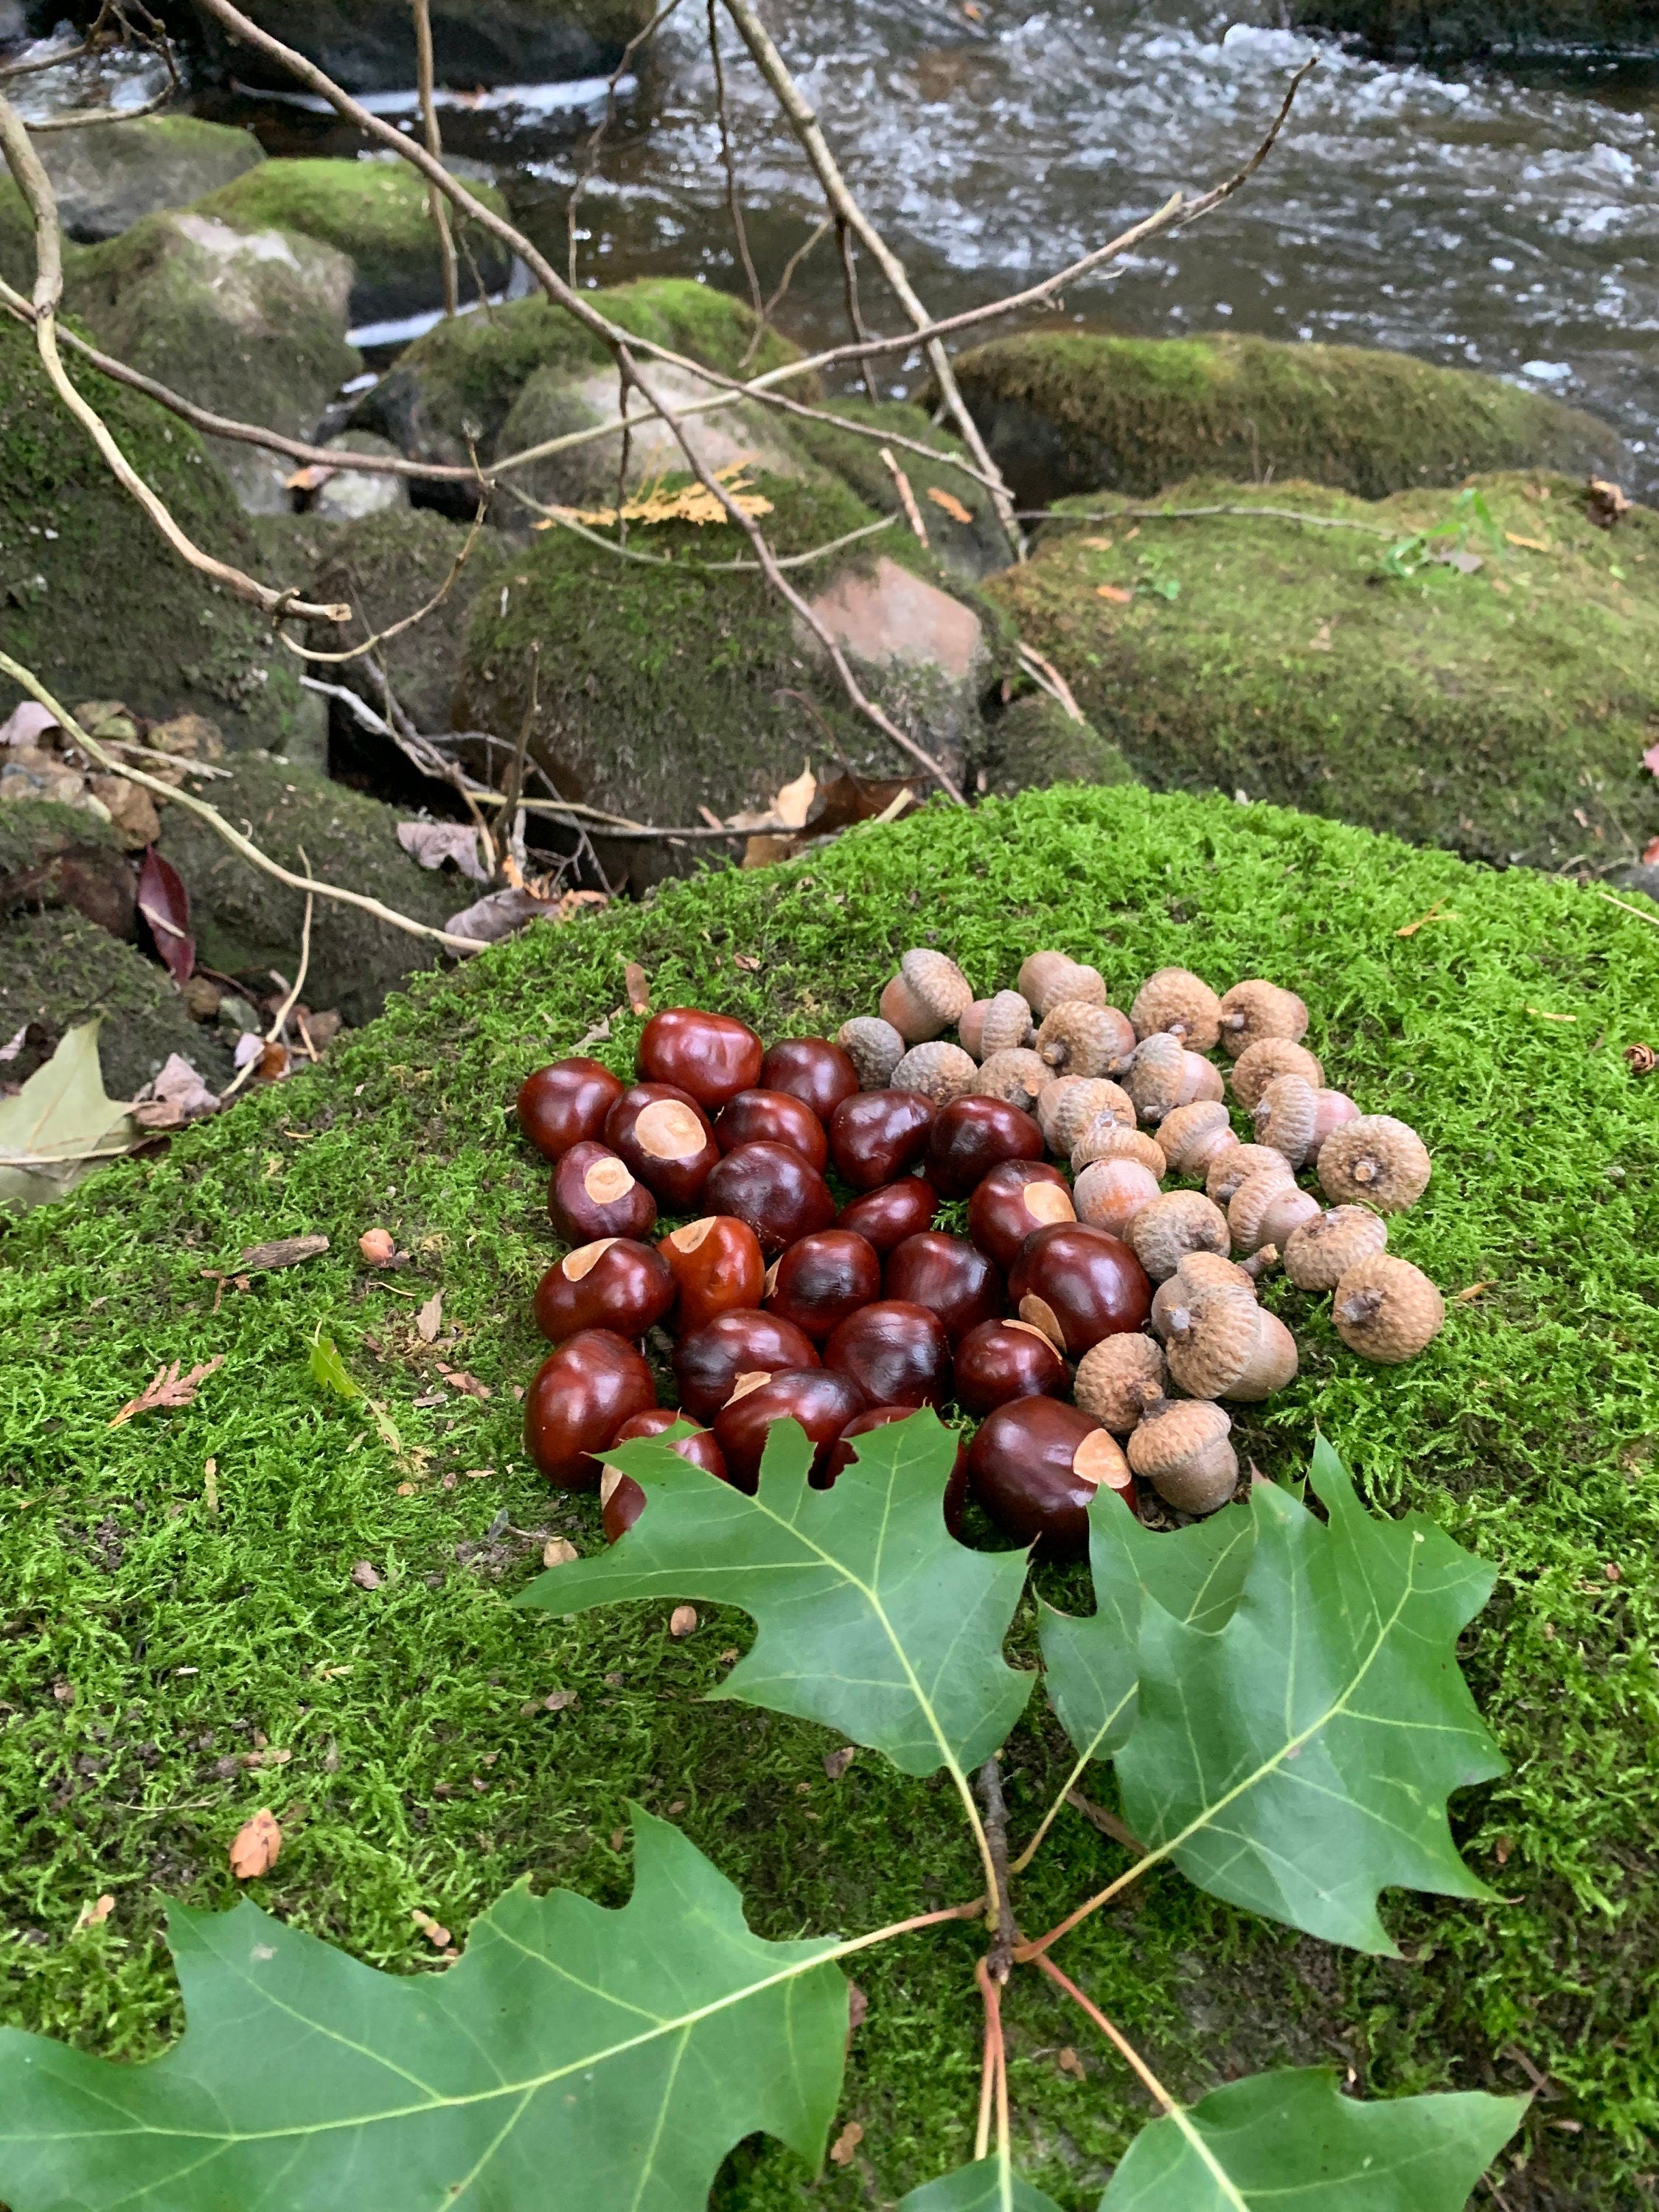 Chestnuts and Acorns Combo, Buckeys and Red Acorns, 25 of Each